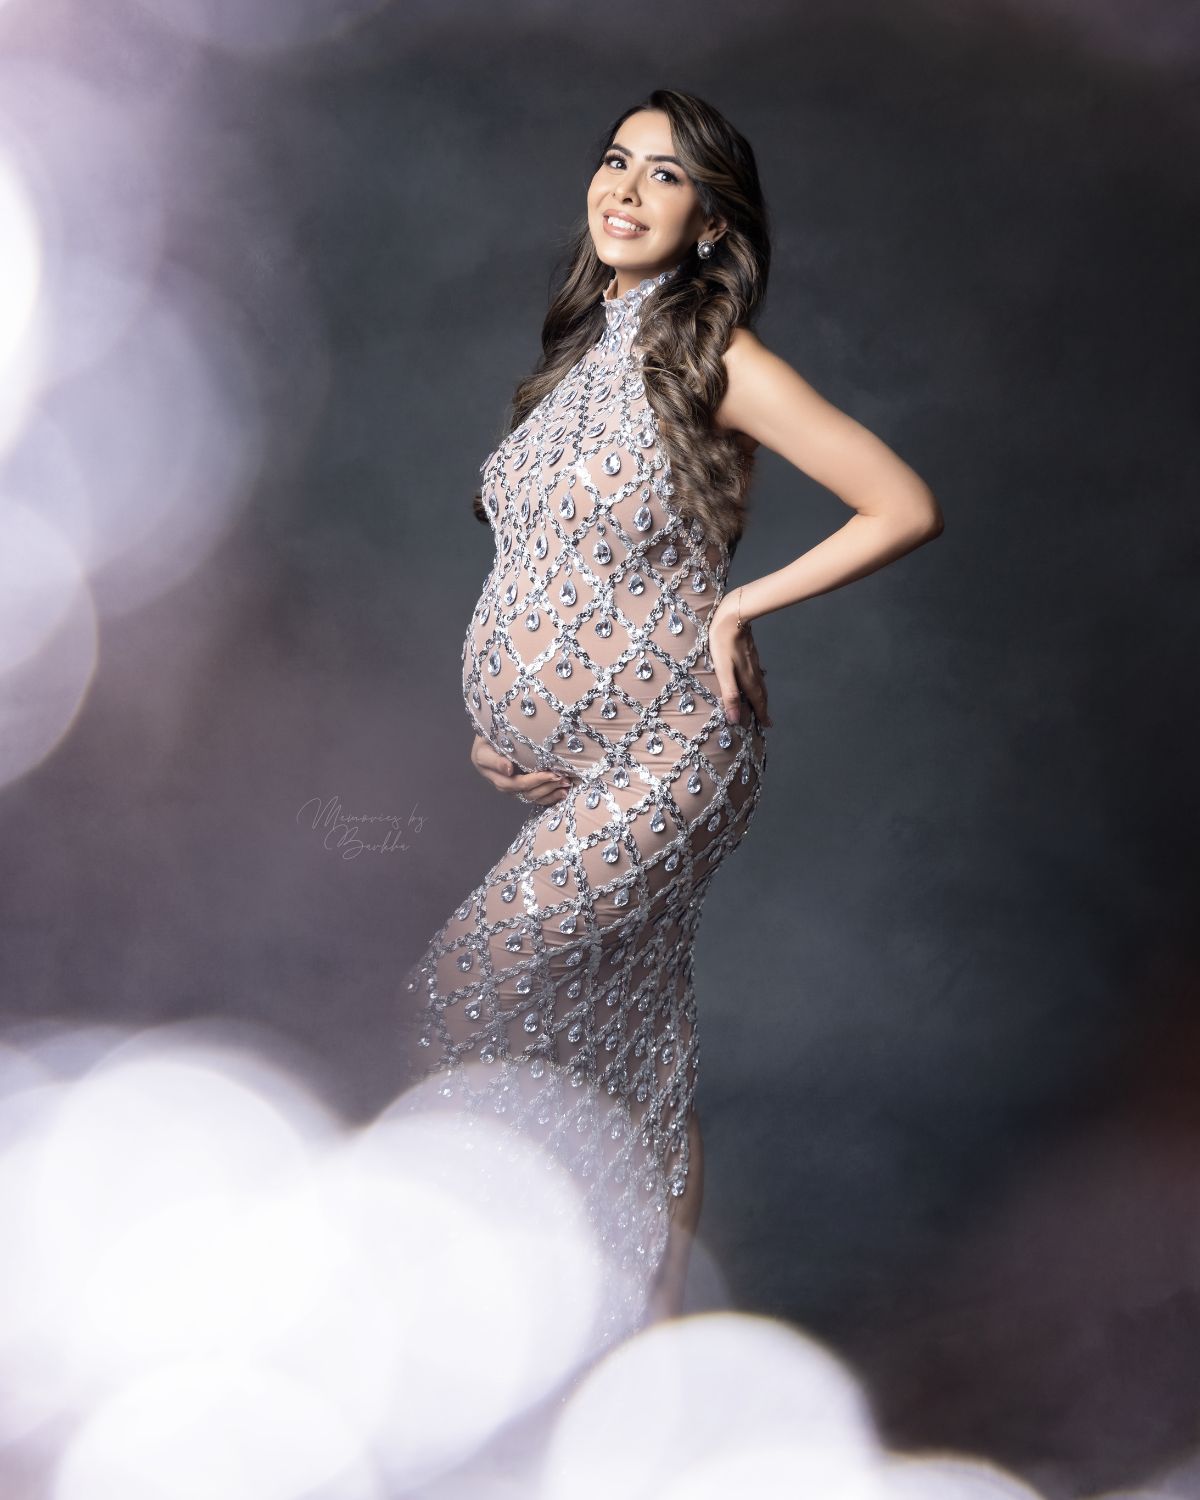 A Touch of Glamour Sequins and Sparkles for Maternity Shoots